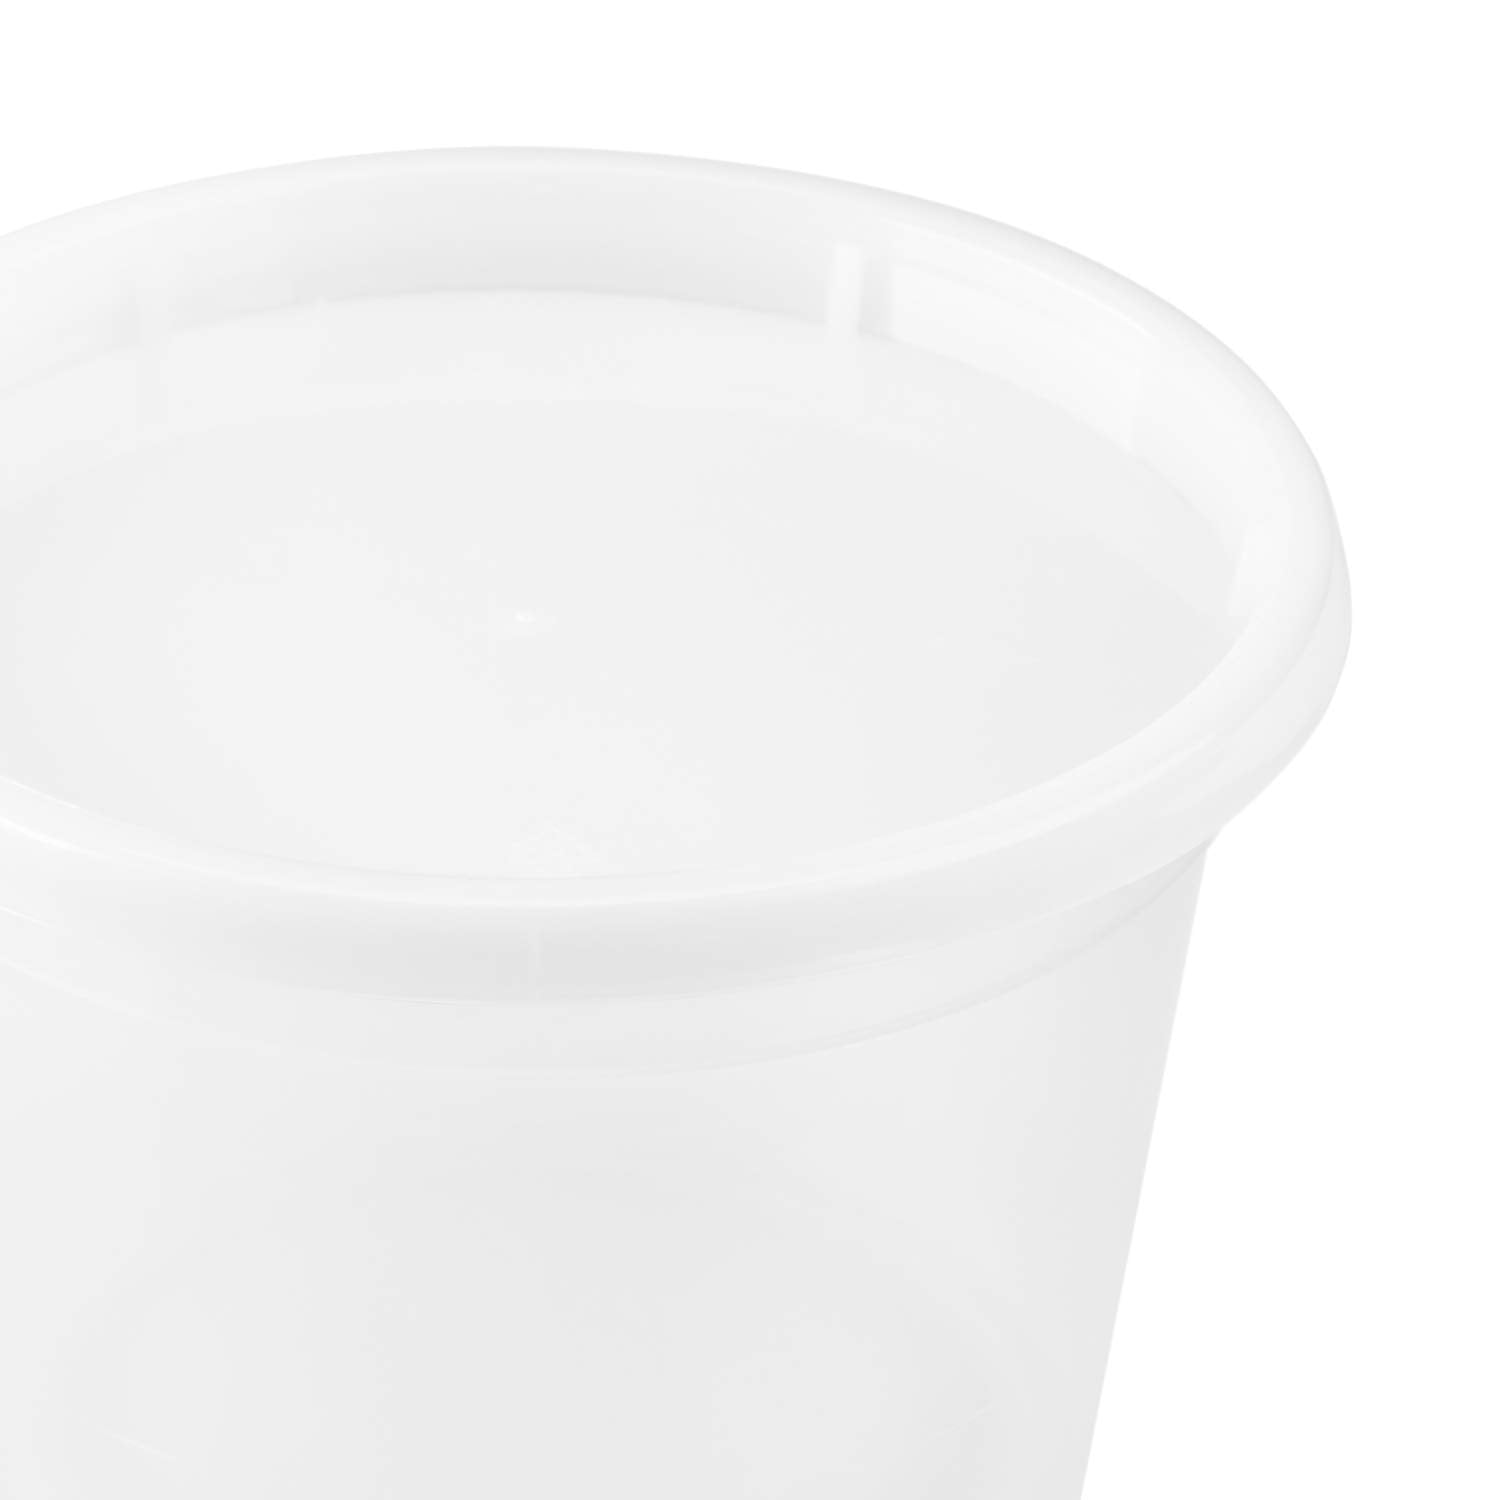 16 OZ DELI CONTAINERS POLYPROPYLENE 500CT — P Plus Packaging